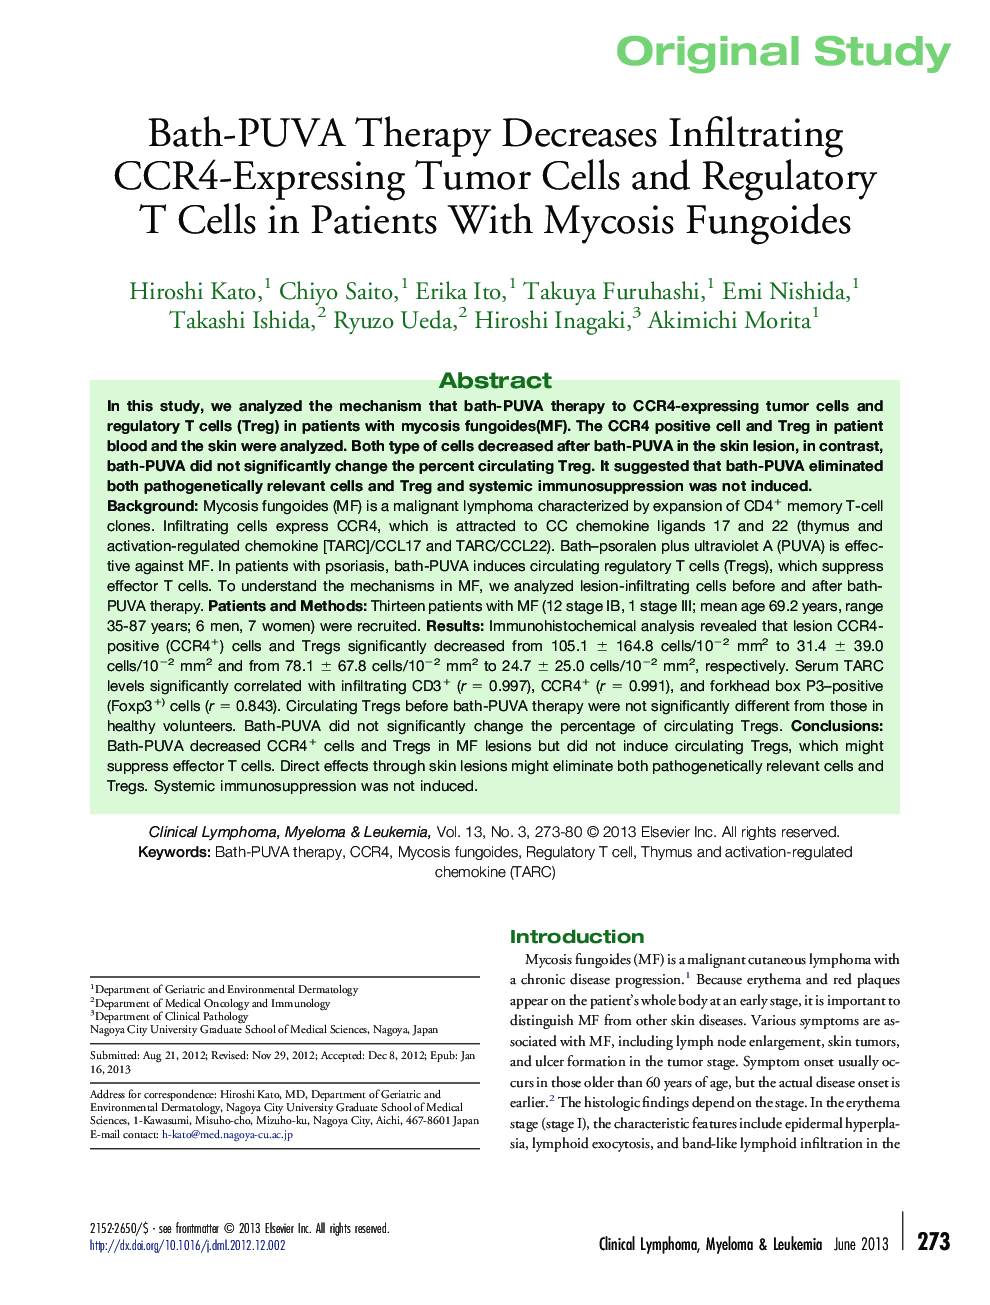 Bath-PUVA Therapy Decreases Infiltrating CCR4-Expressing Tumor Cells and Regulatory T Cells in Patients With Mycosis Fungoides